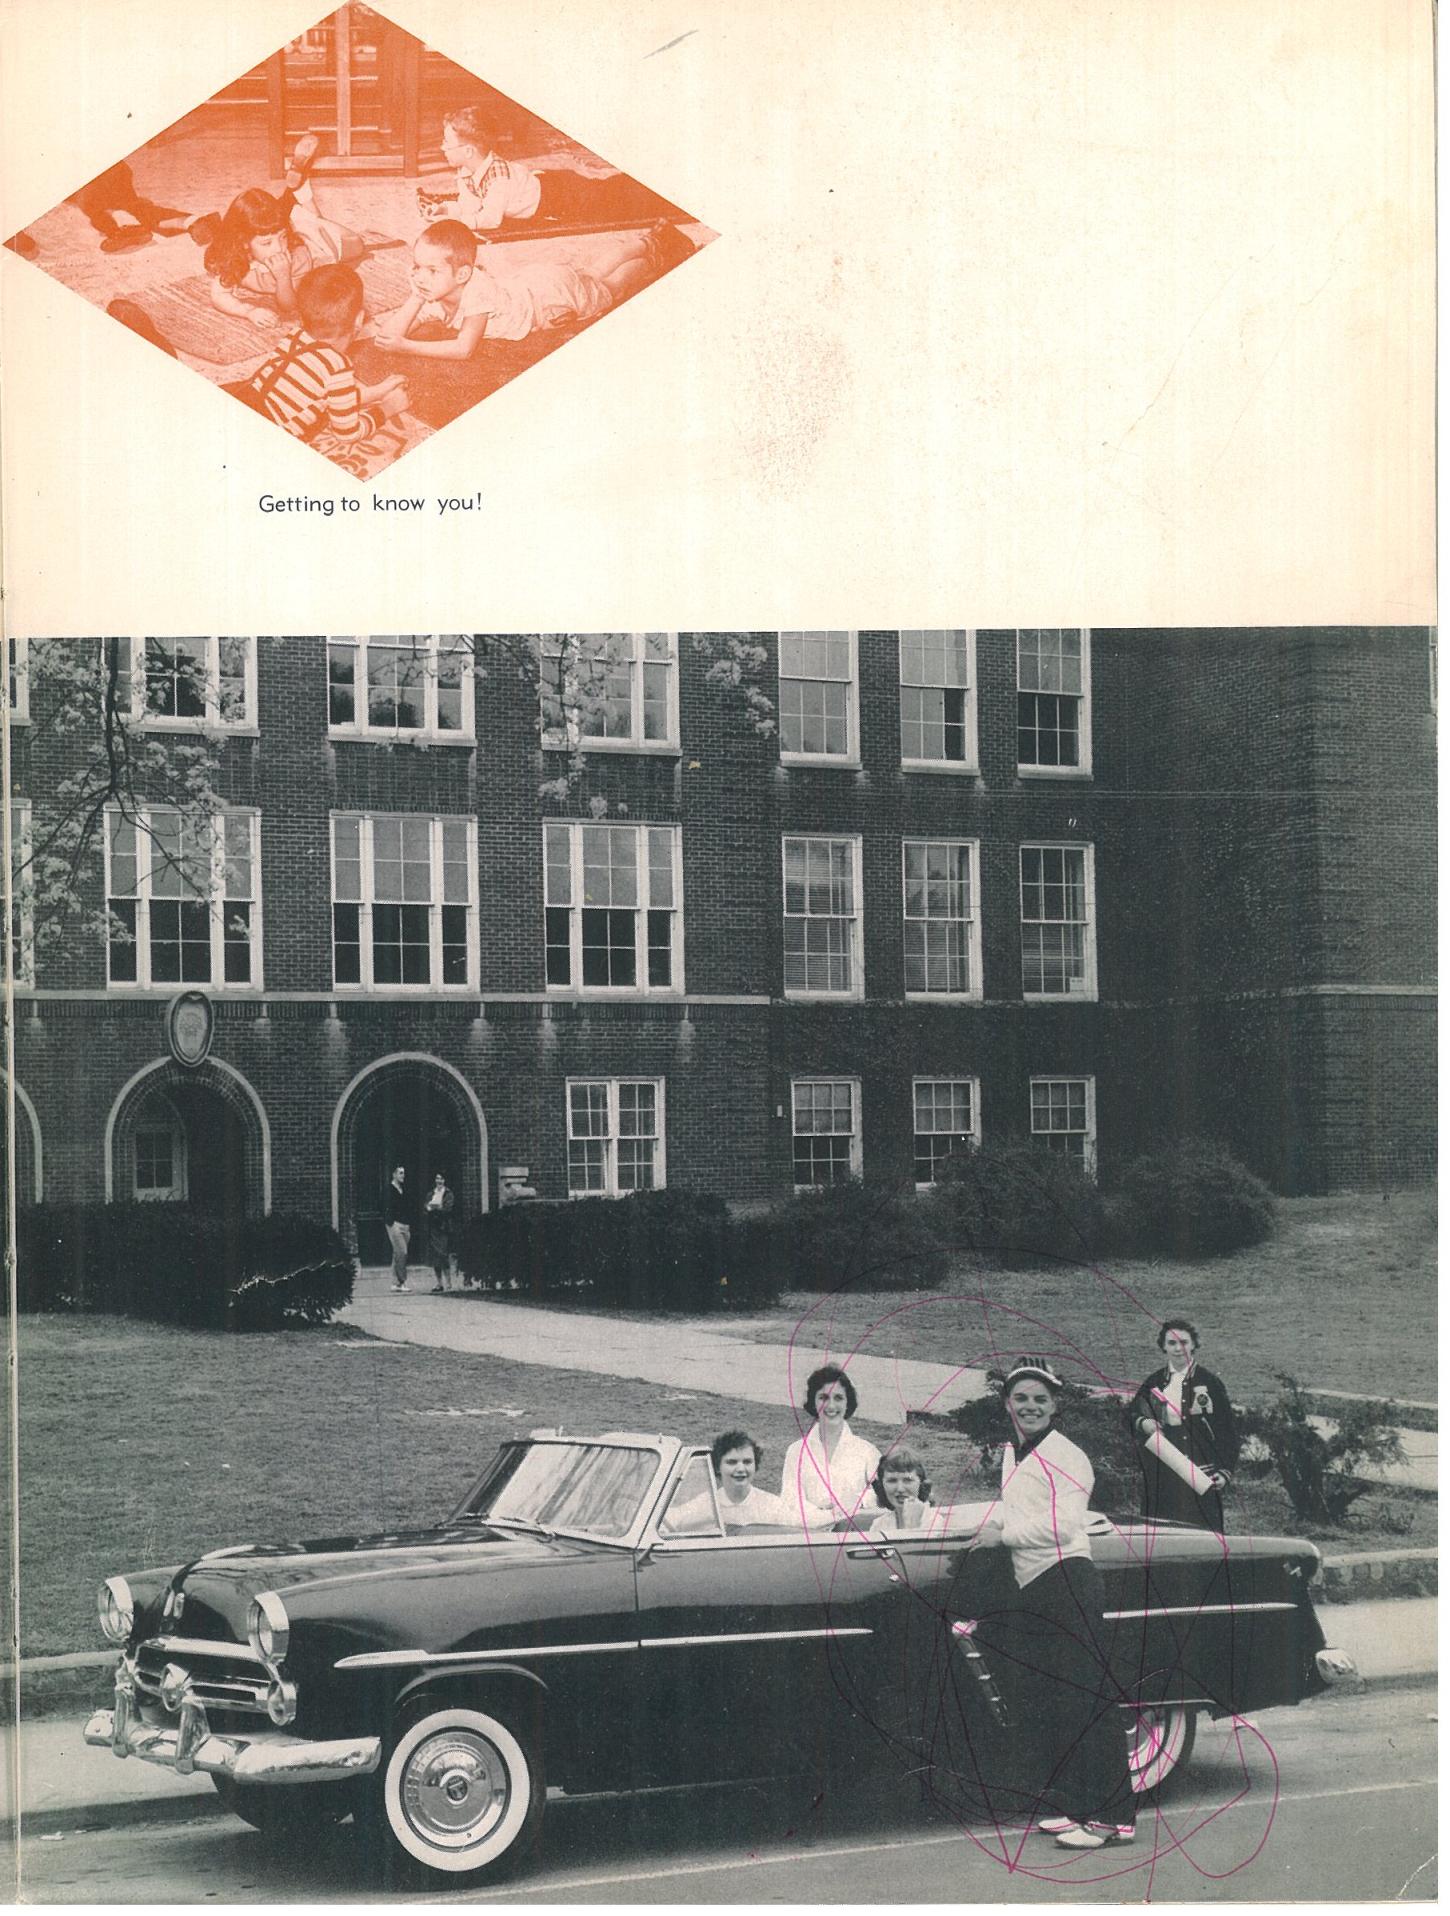 ICONIC PHOTO SHOWING OUR SCHOOL AHS WITH CLASSIC CAR AND CLASSMATES